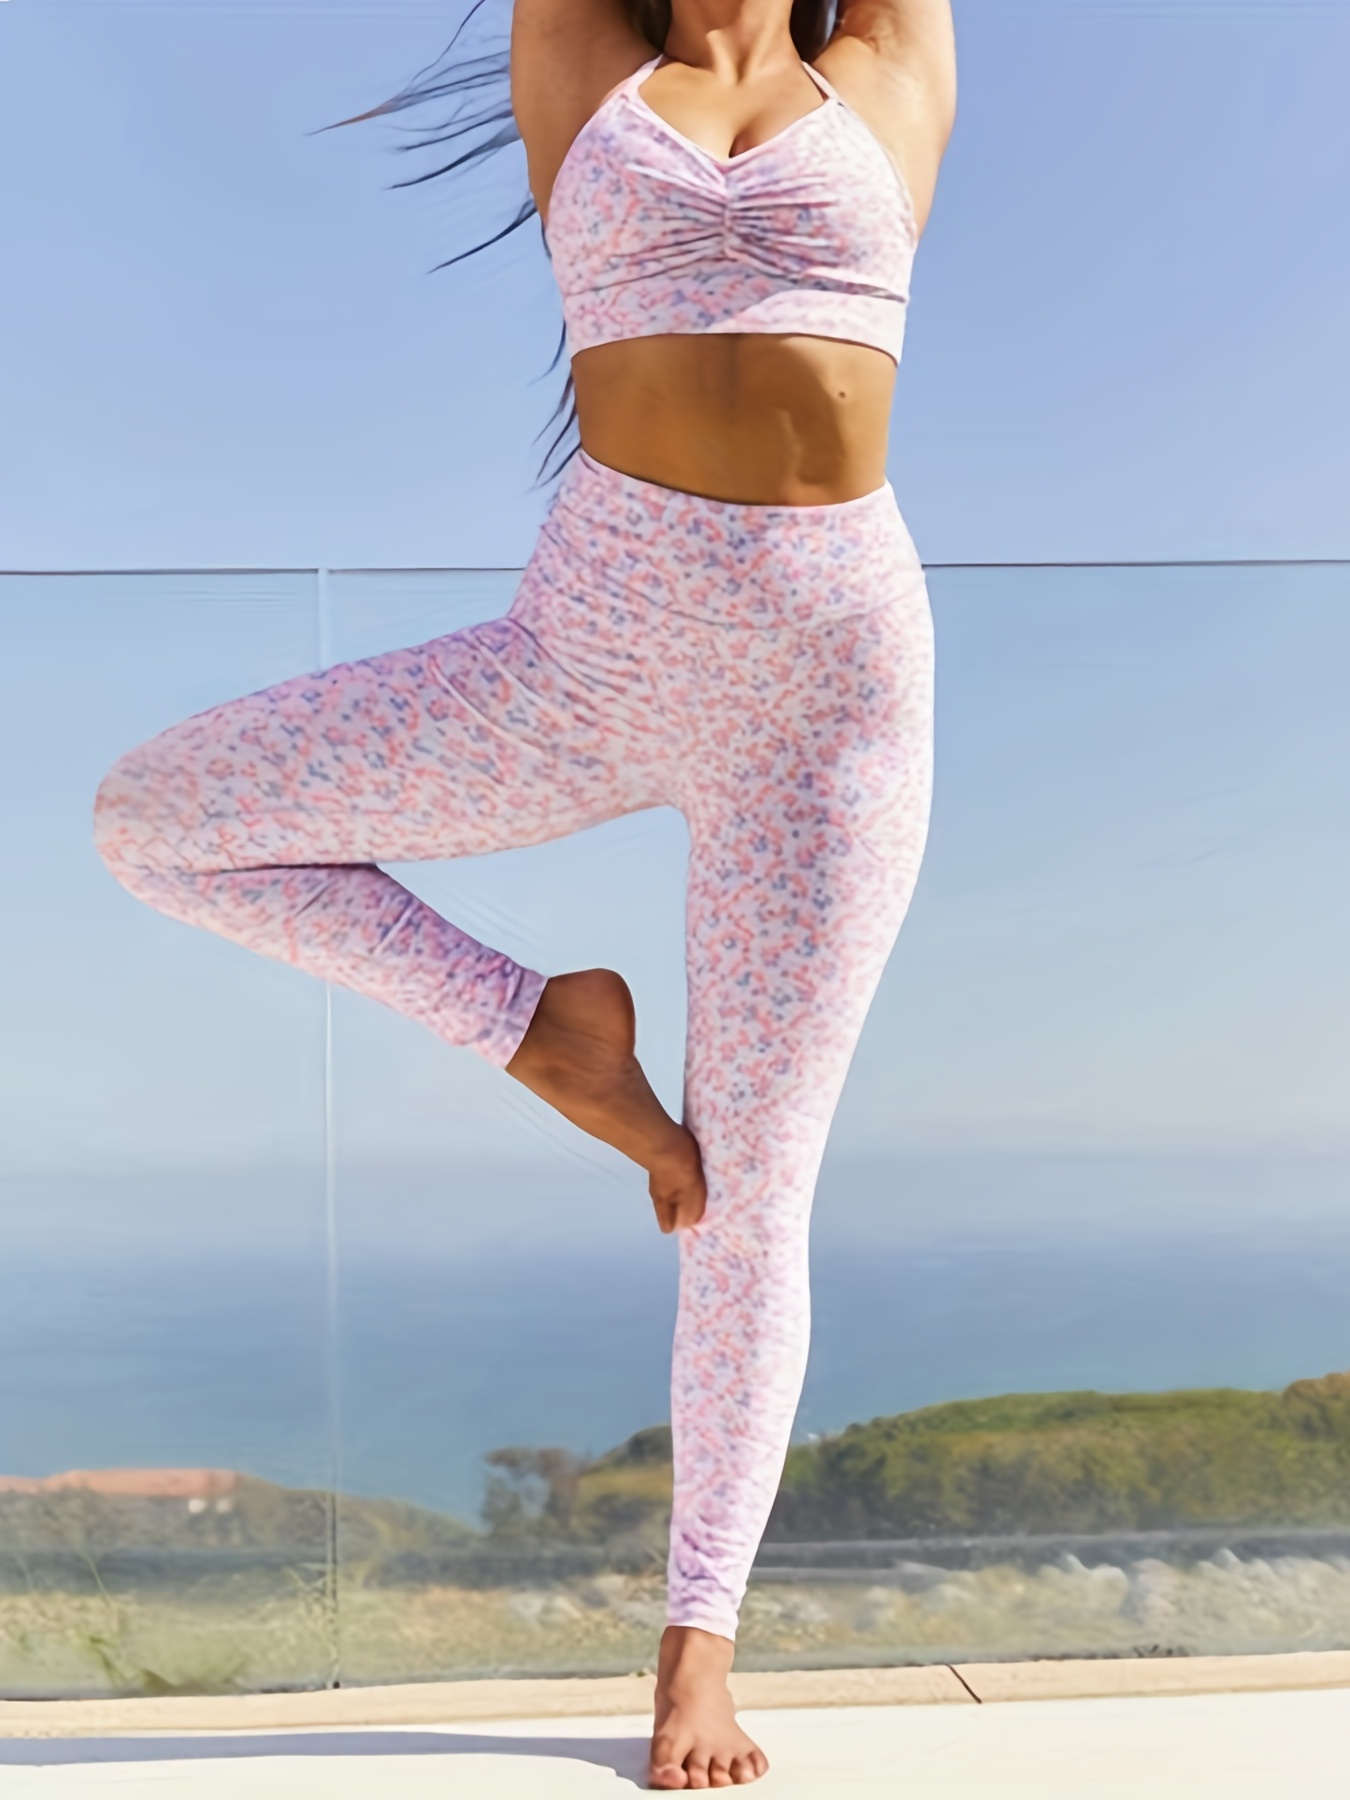 victoria secret PINK leggings outfit WITH LEOPARD PRINT LOGO